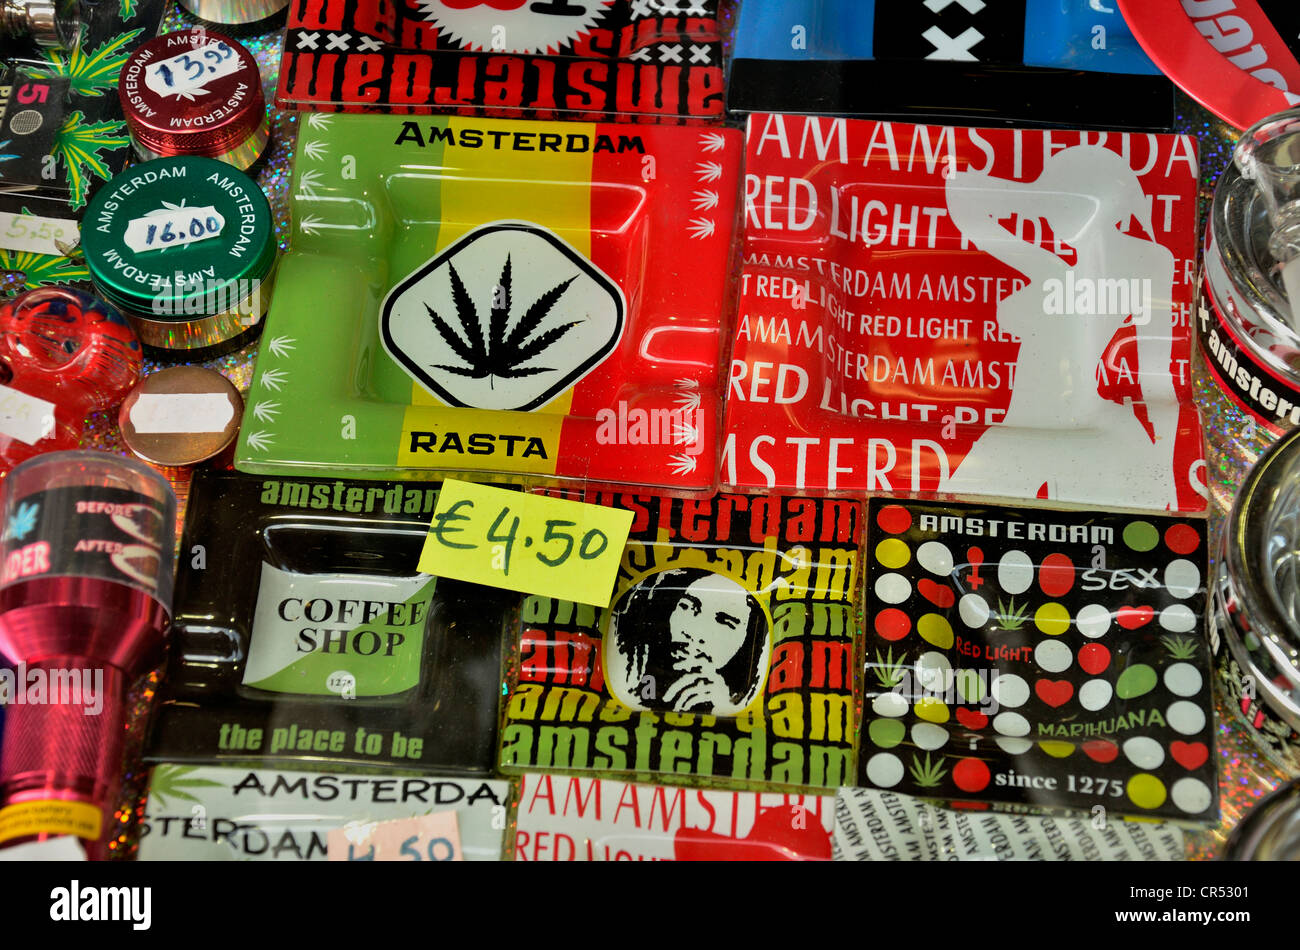 Range of goods in a cannabis coffee shop, Amsterdam, Holland, Netherlands, Europe Stock Photo